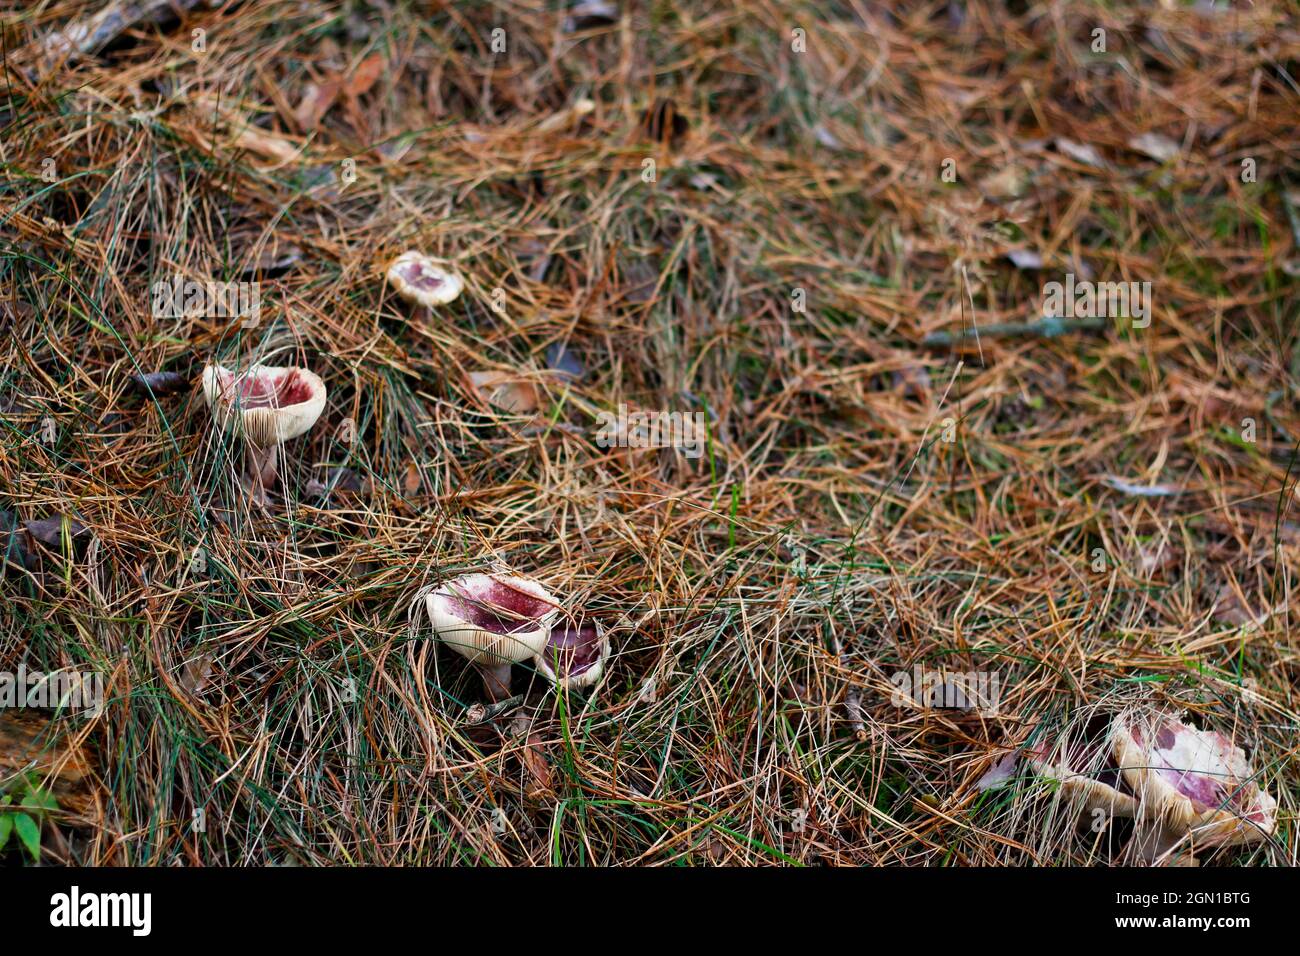 Defocus group of red russula mushrooms among dry grass, leaves and needles. Edible mushroom growing in the green forest. Boletus hiding in ground. Top Stock Photo